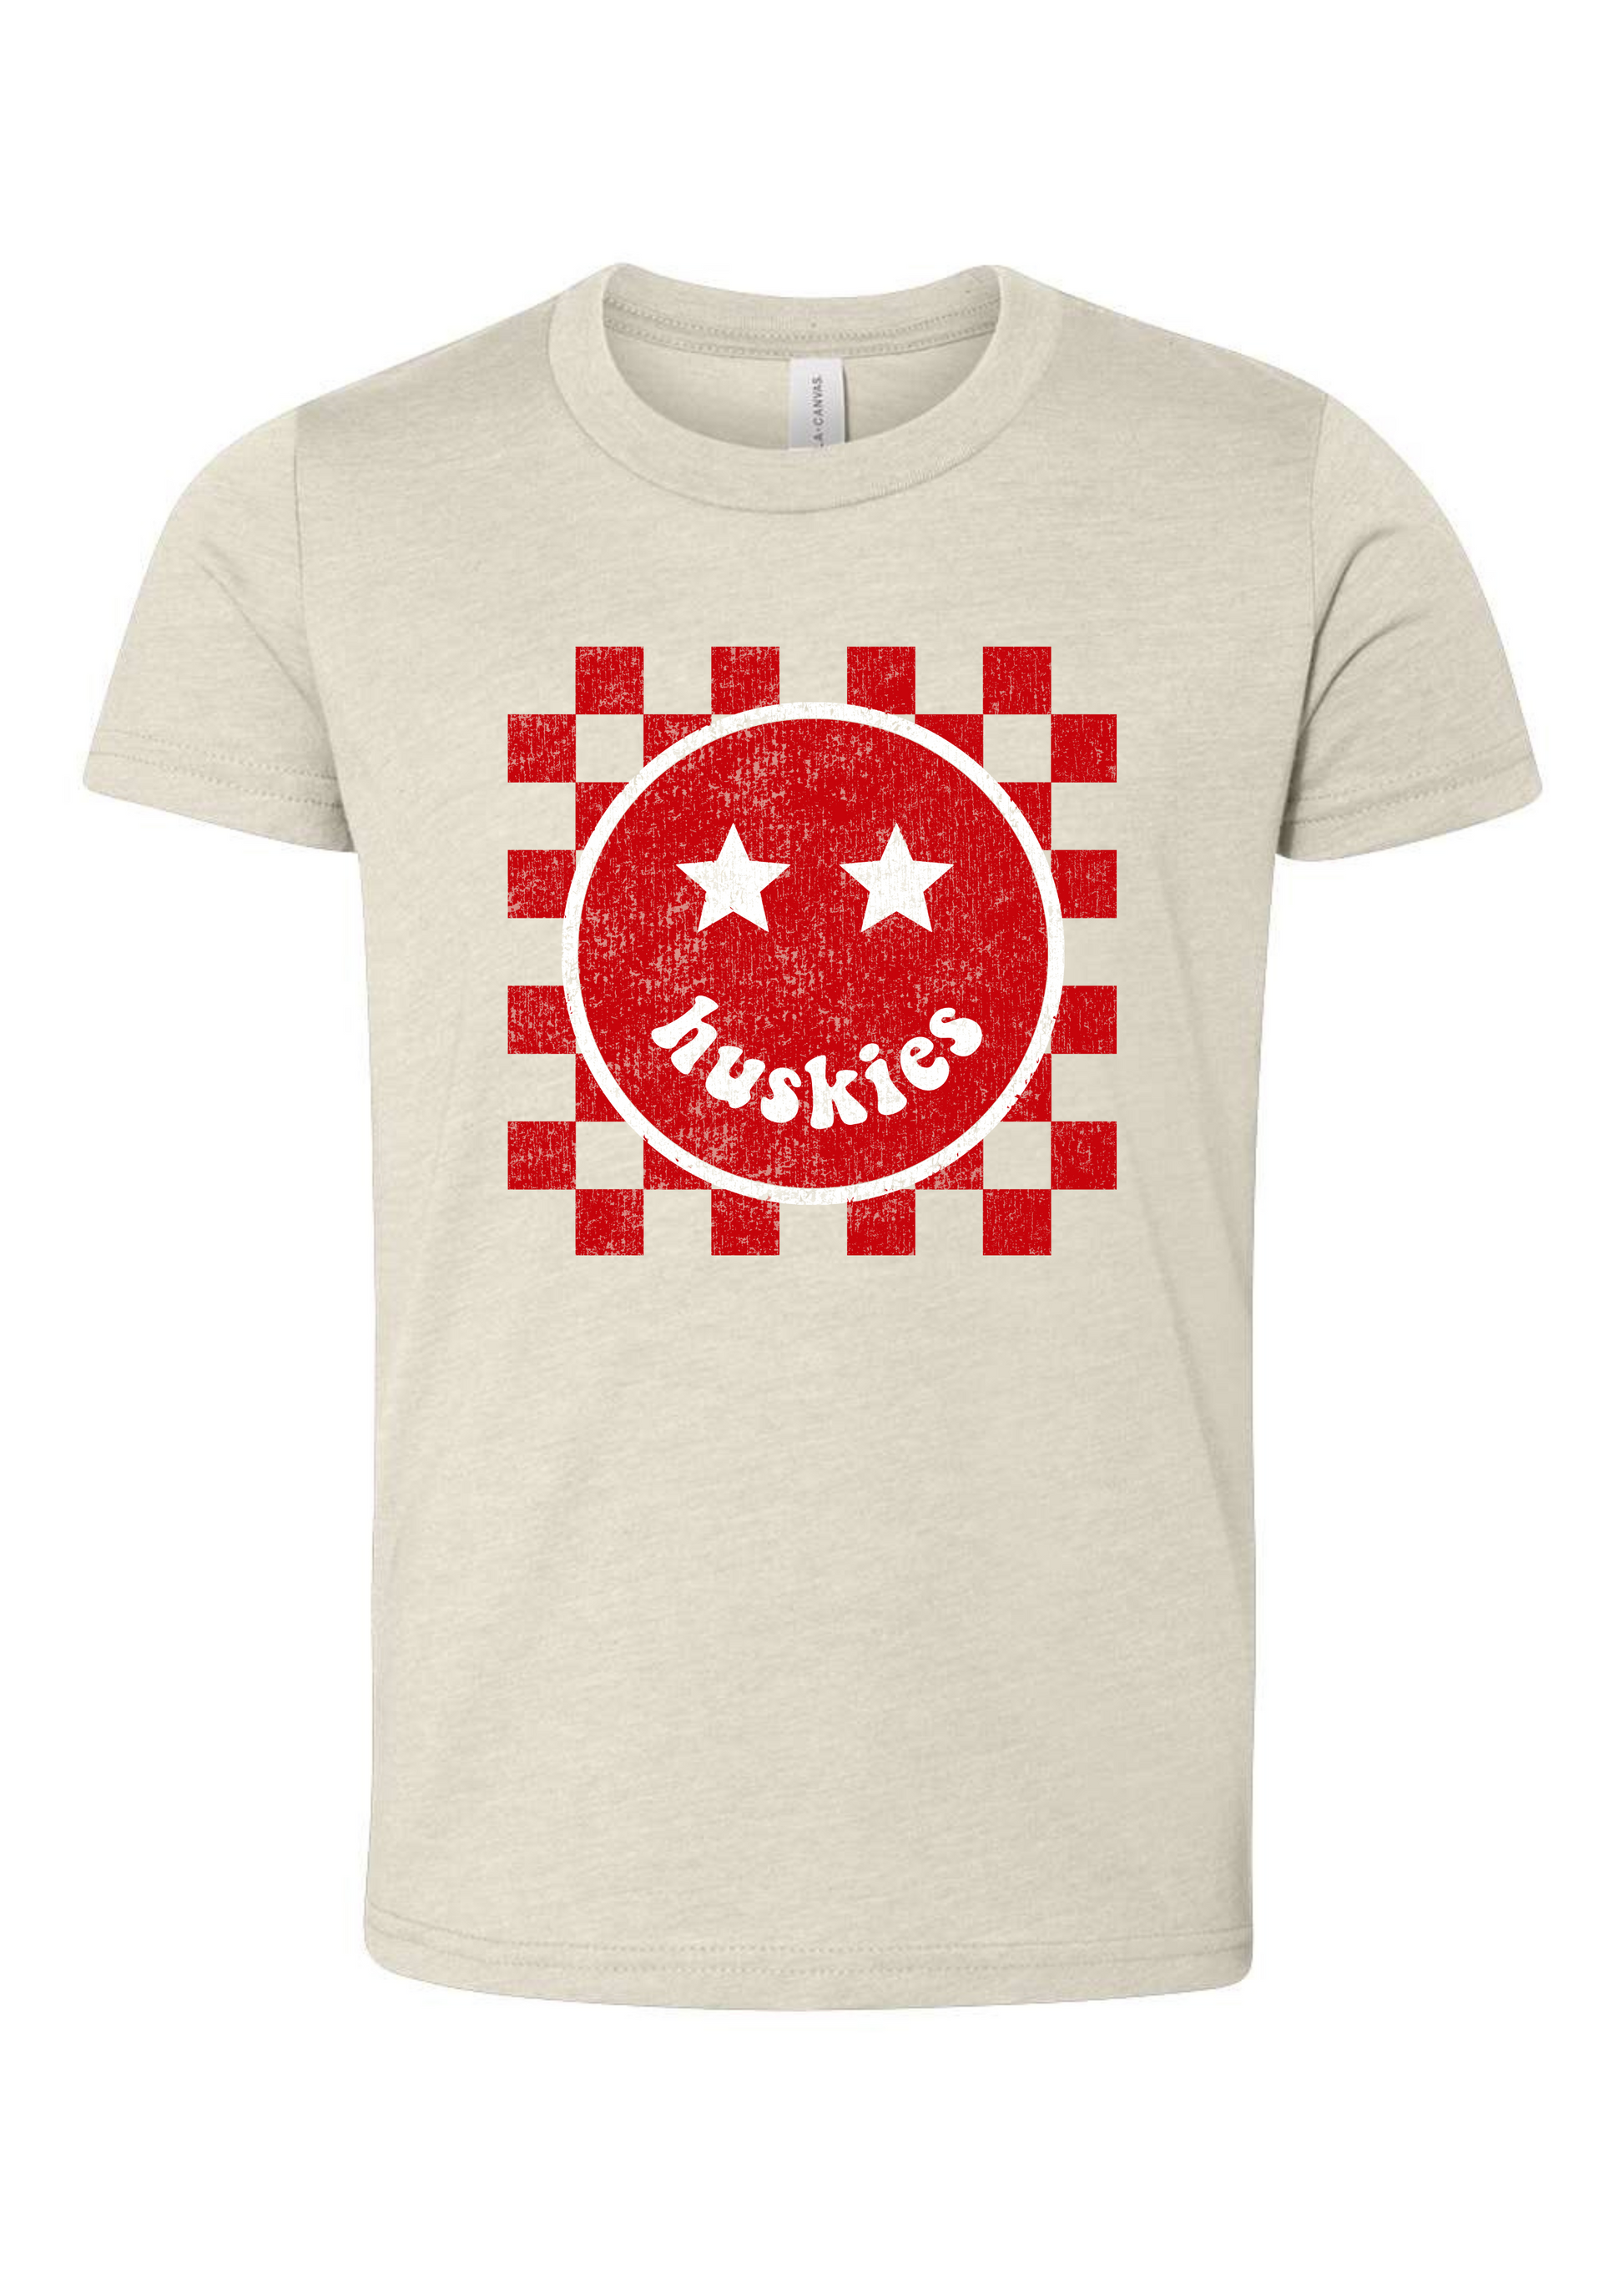 Huskies Happy Checkered | Kids Tee-Kids Tees-Sister Shirts-Sister Shirts, Cute & Custom Tees for Mama & Littles in Trussville, Alabama.